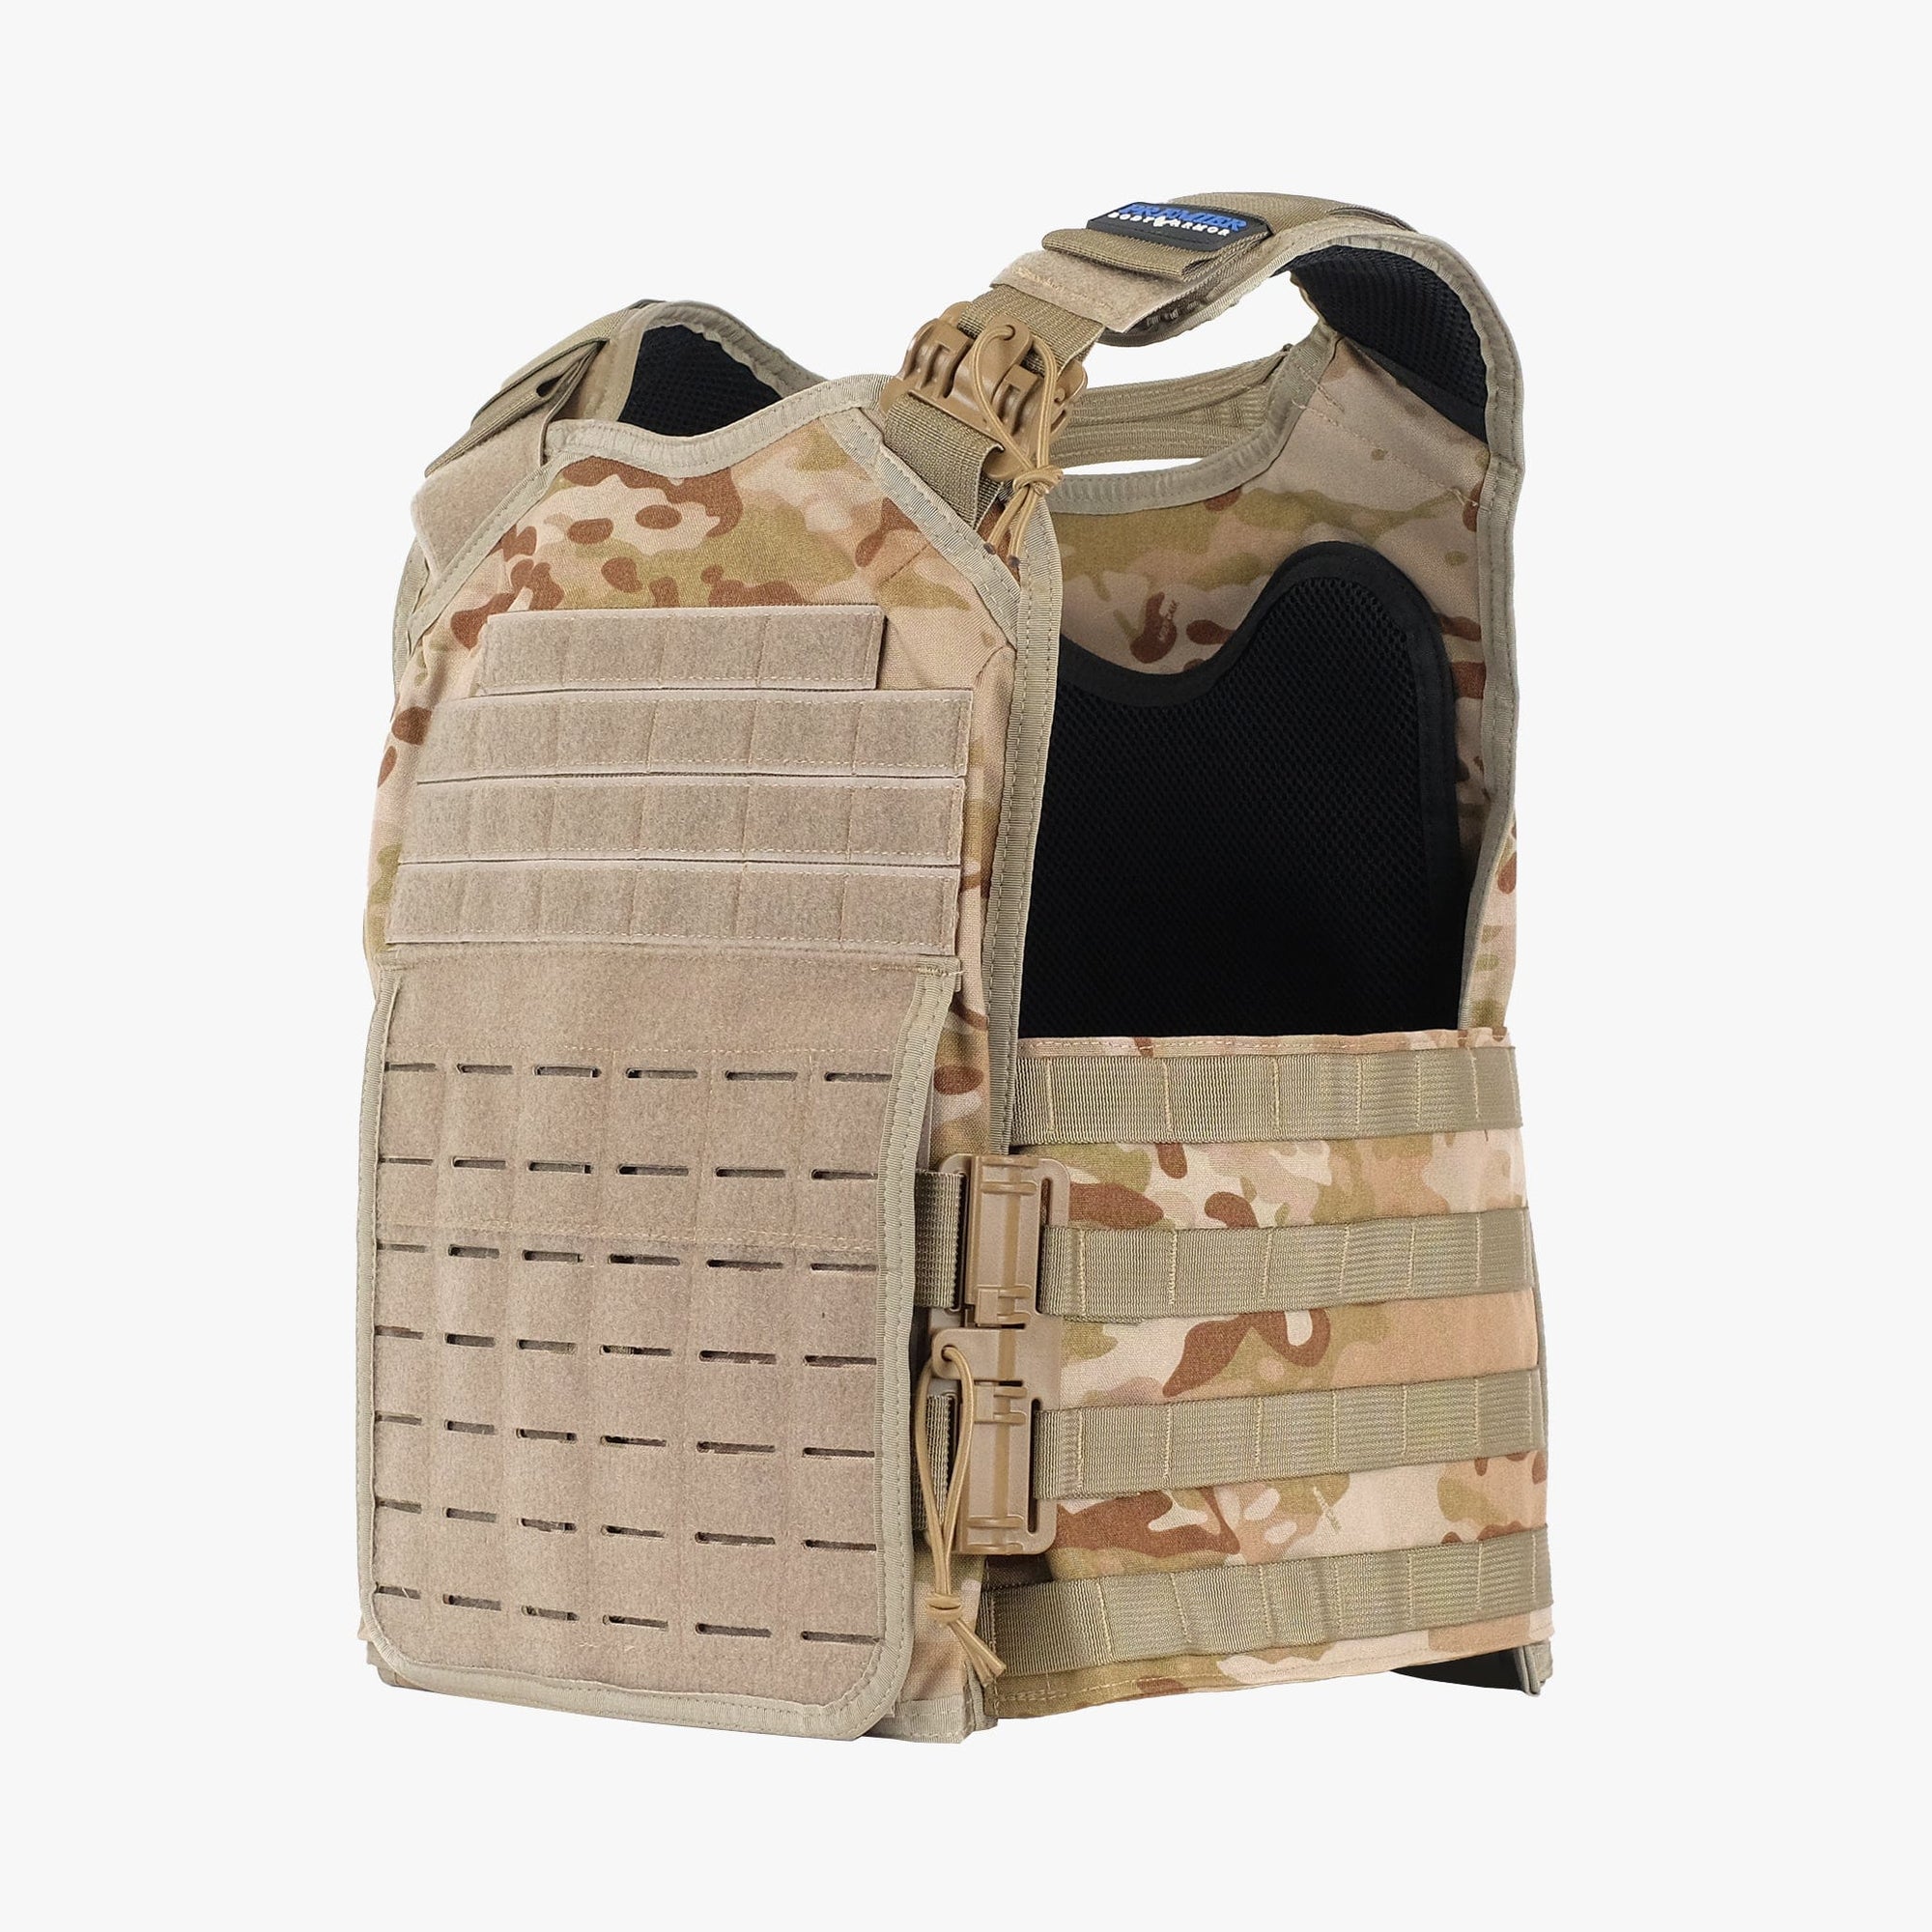 The best plate carrier vest for all your needs. This tactical bulletproof vest can be enhanced with level 3 or level 4 rifle rated plates. The best plate carrier vest includes level 3a side ballistic panels. 